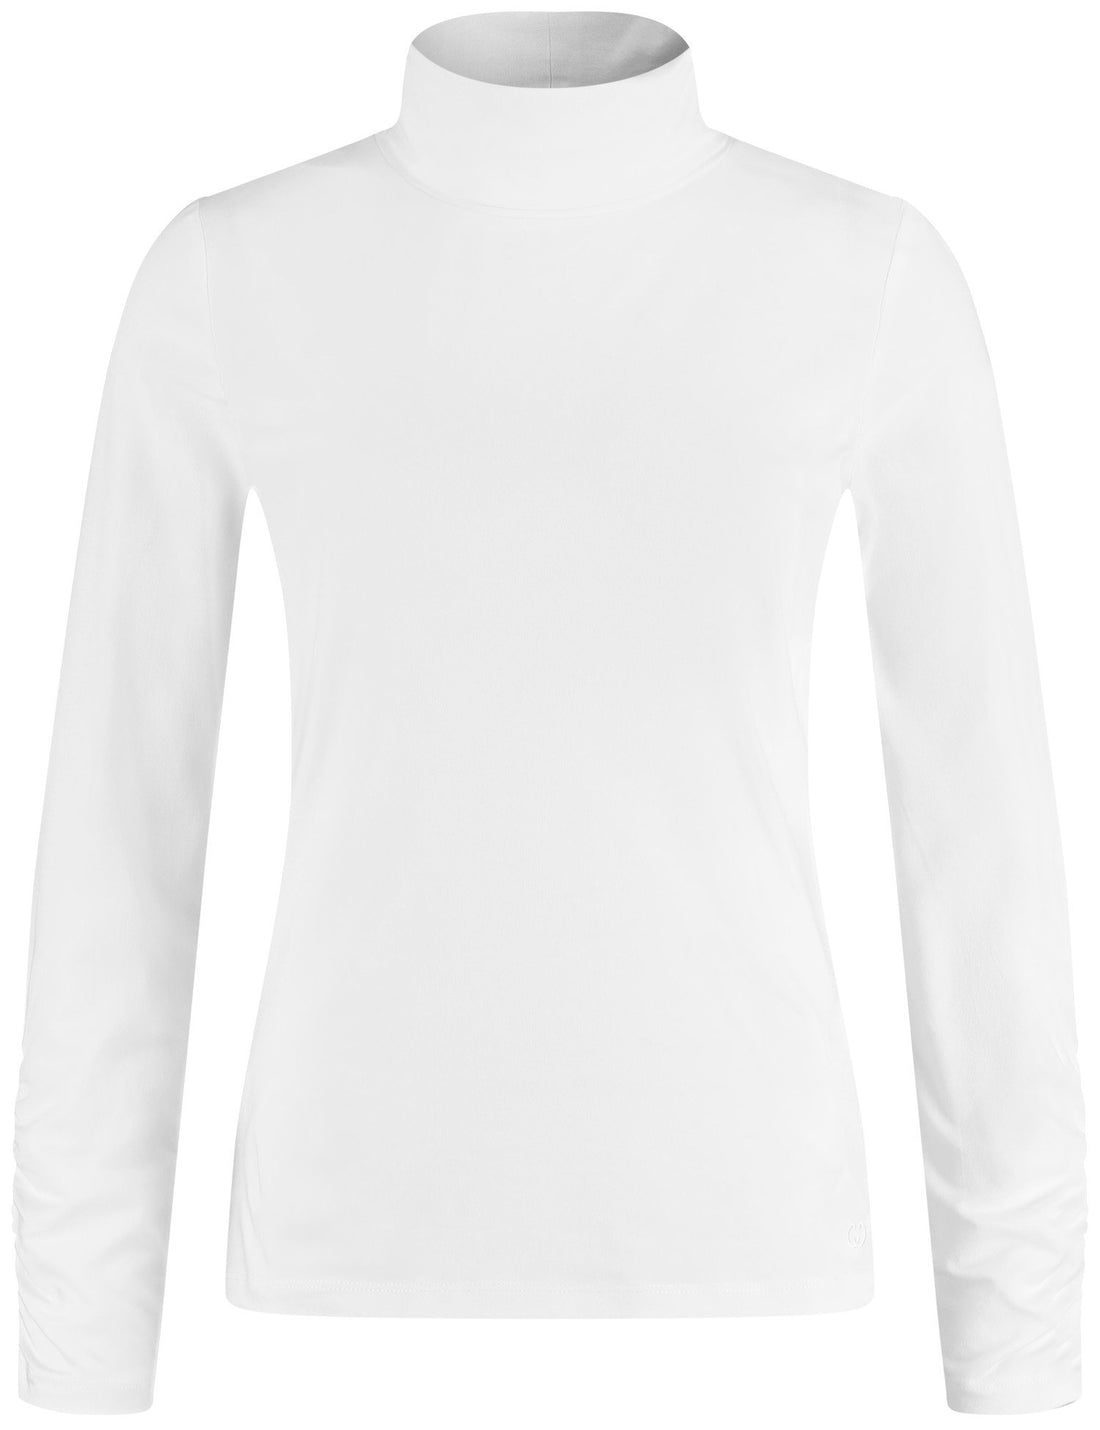 Long Sleeve Top With A Polo Collar And Gathers On The Sleeves_170144-44009_99700_02